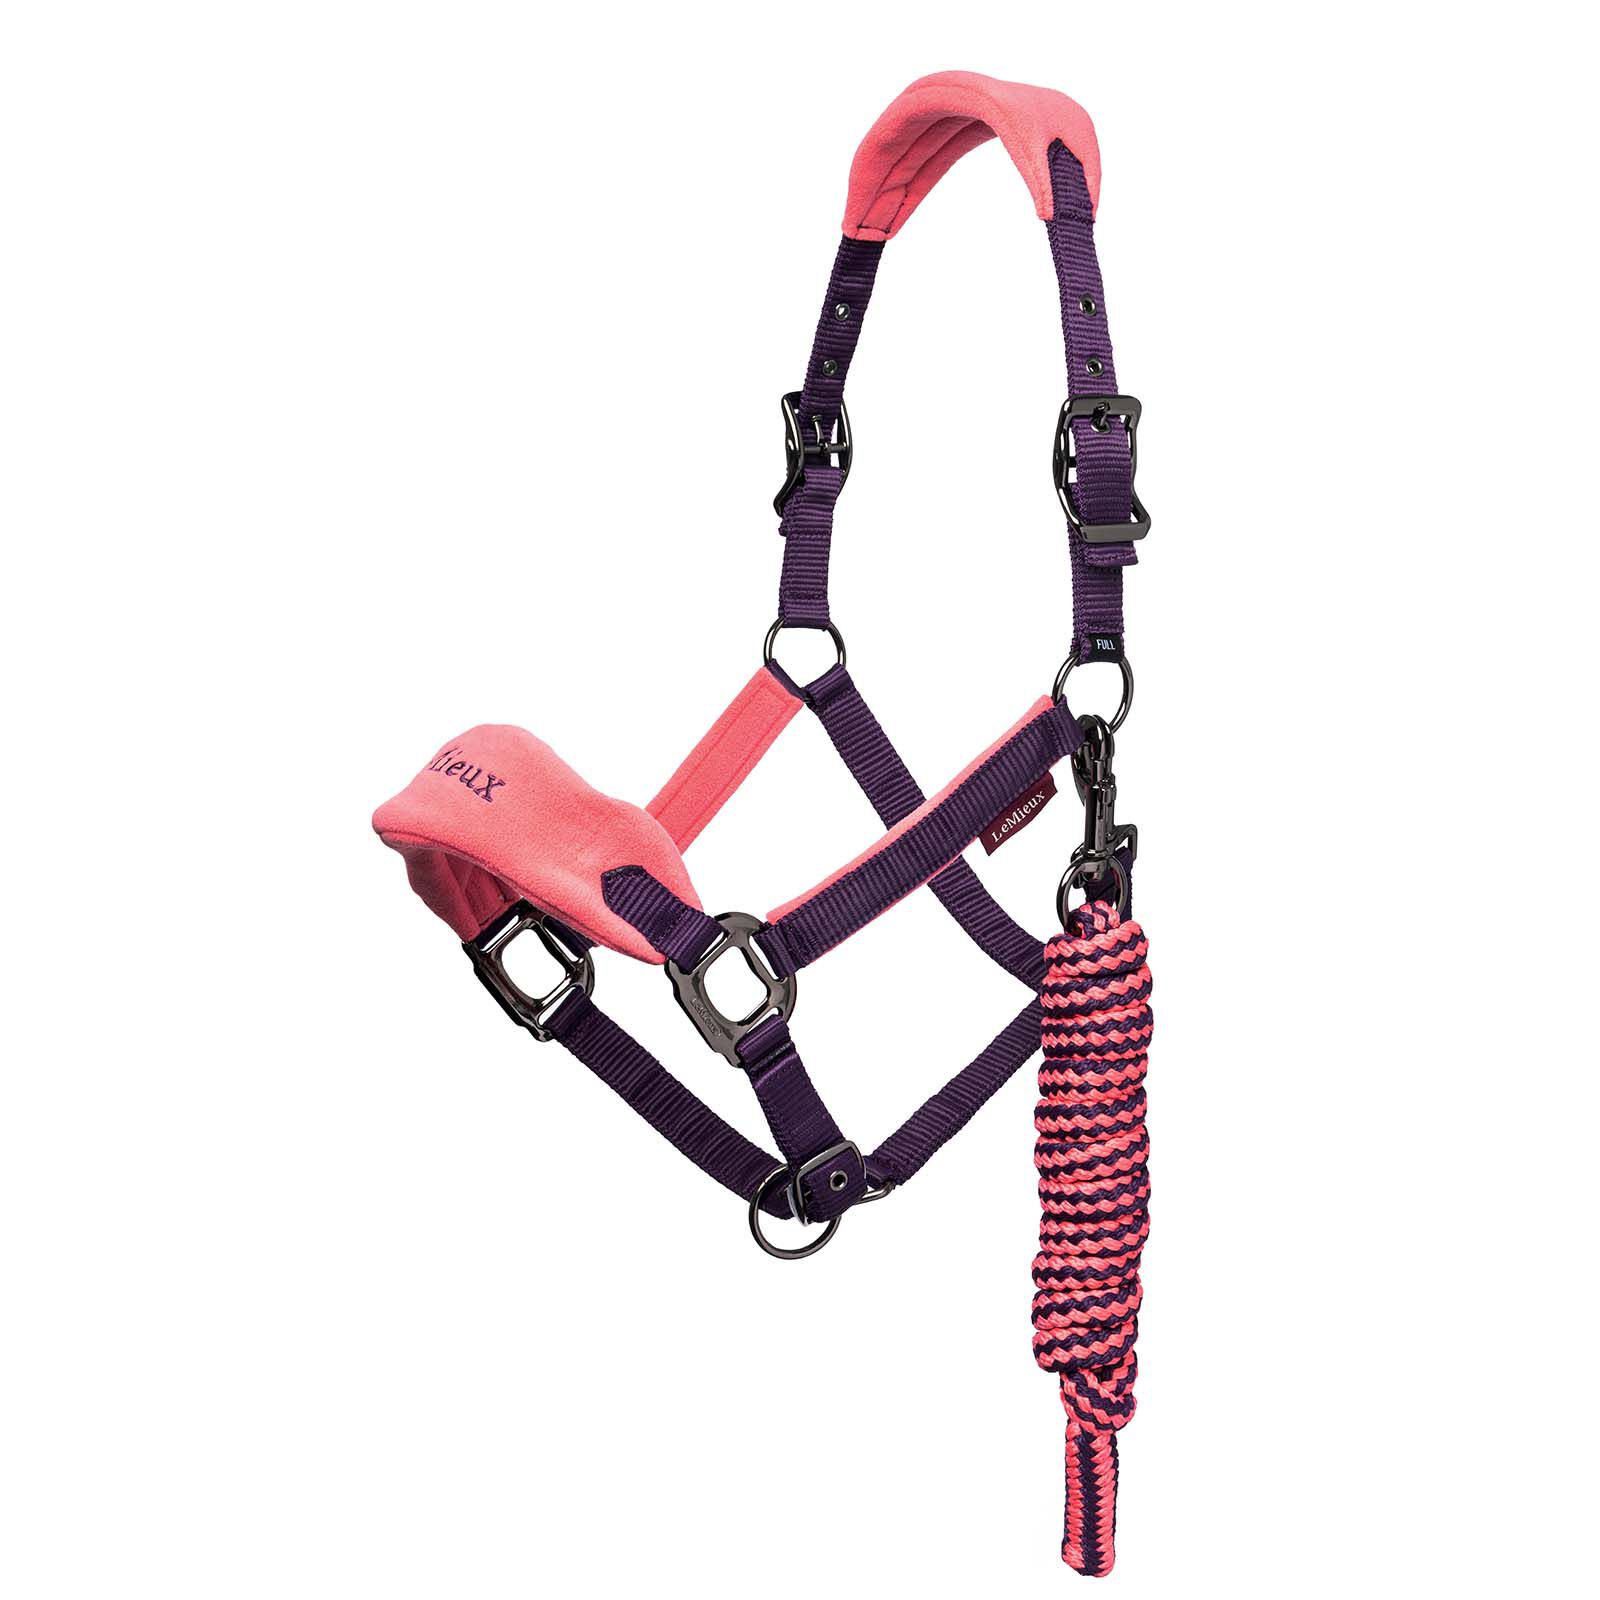 Adjustable at Curb and Poll Strap LeMieux Vogue Fleece Headcollar with Lead Rope Extra Padding 